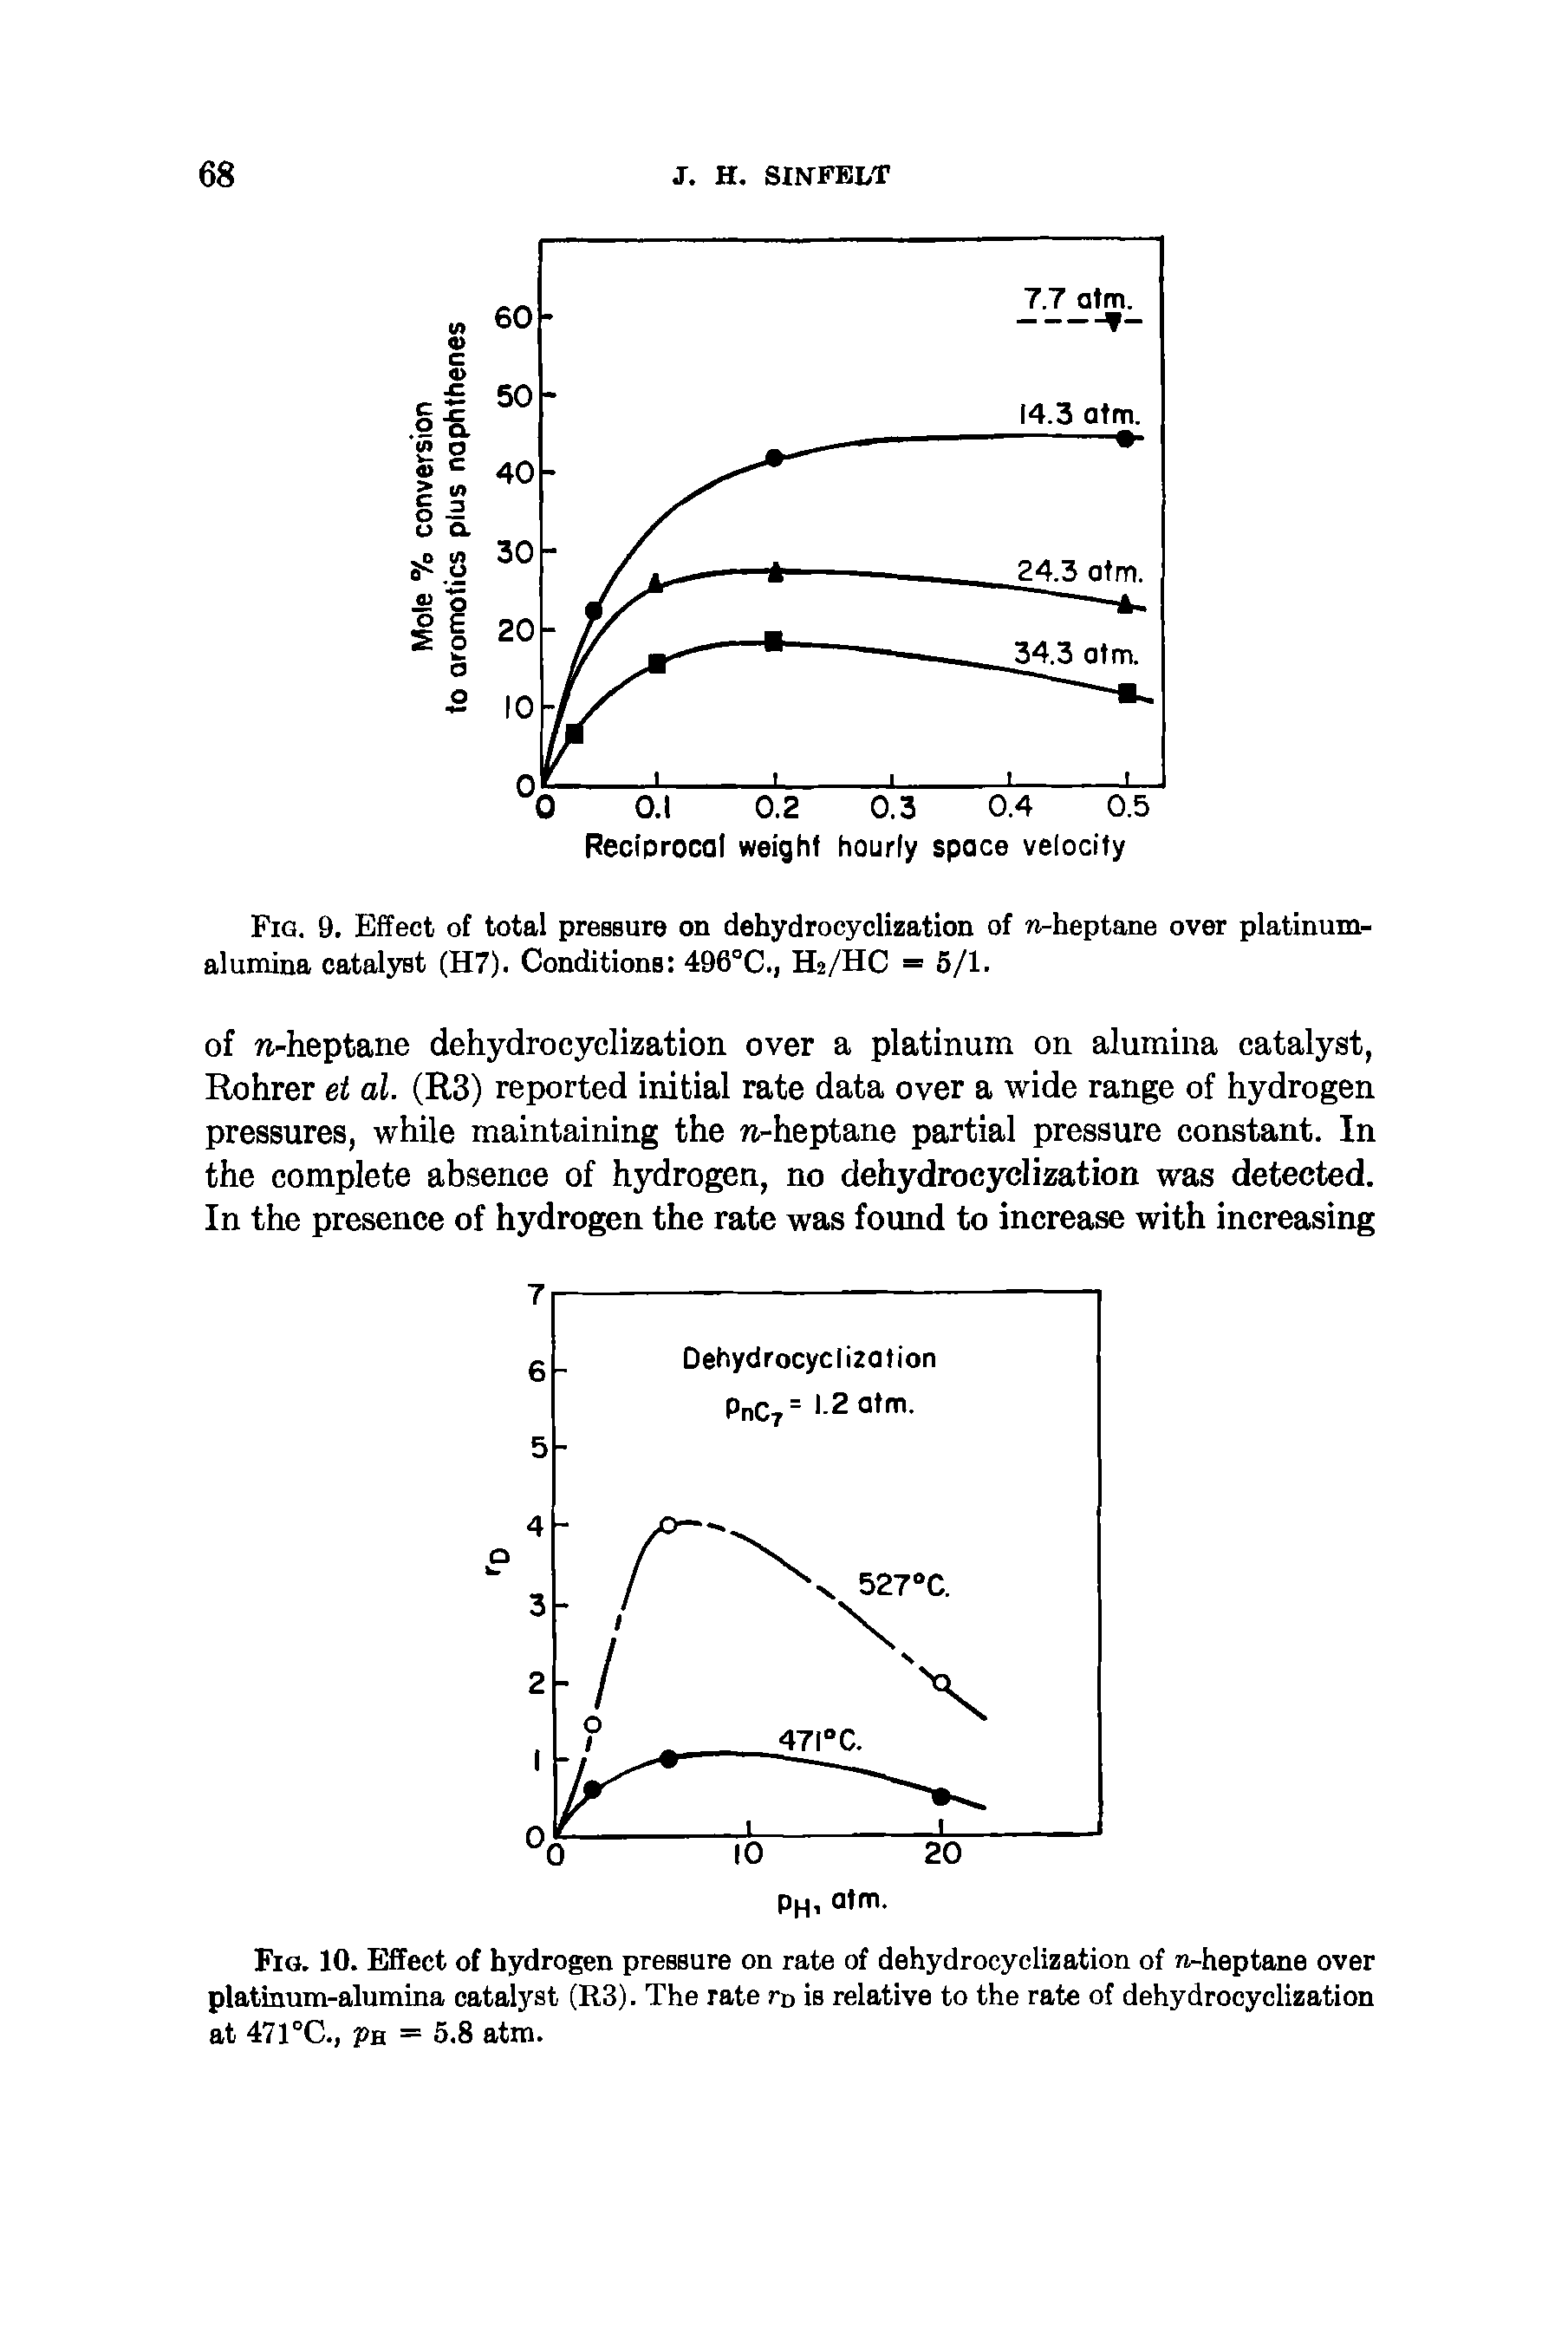 Fig. 9. Effect of total pressure on dehydrocyclization of n-heptane over platinum-alumina catalyst (H7). Conditions 496°C., H2/HC = 5/1.